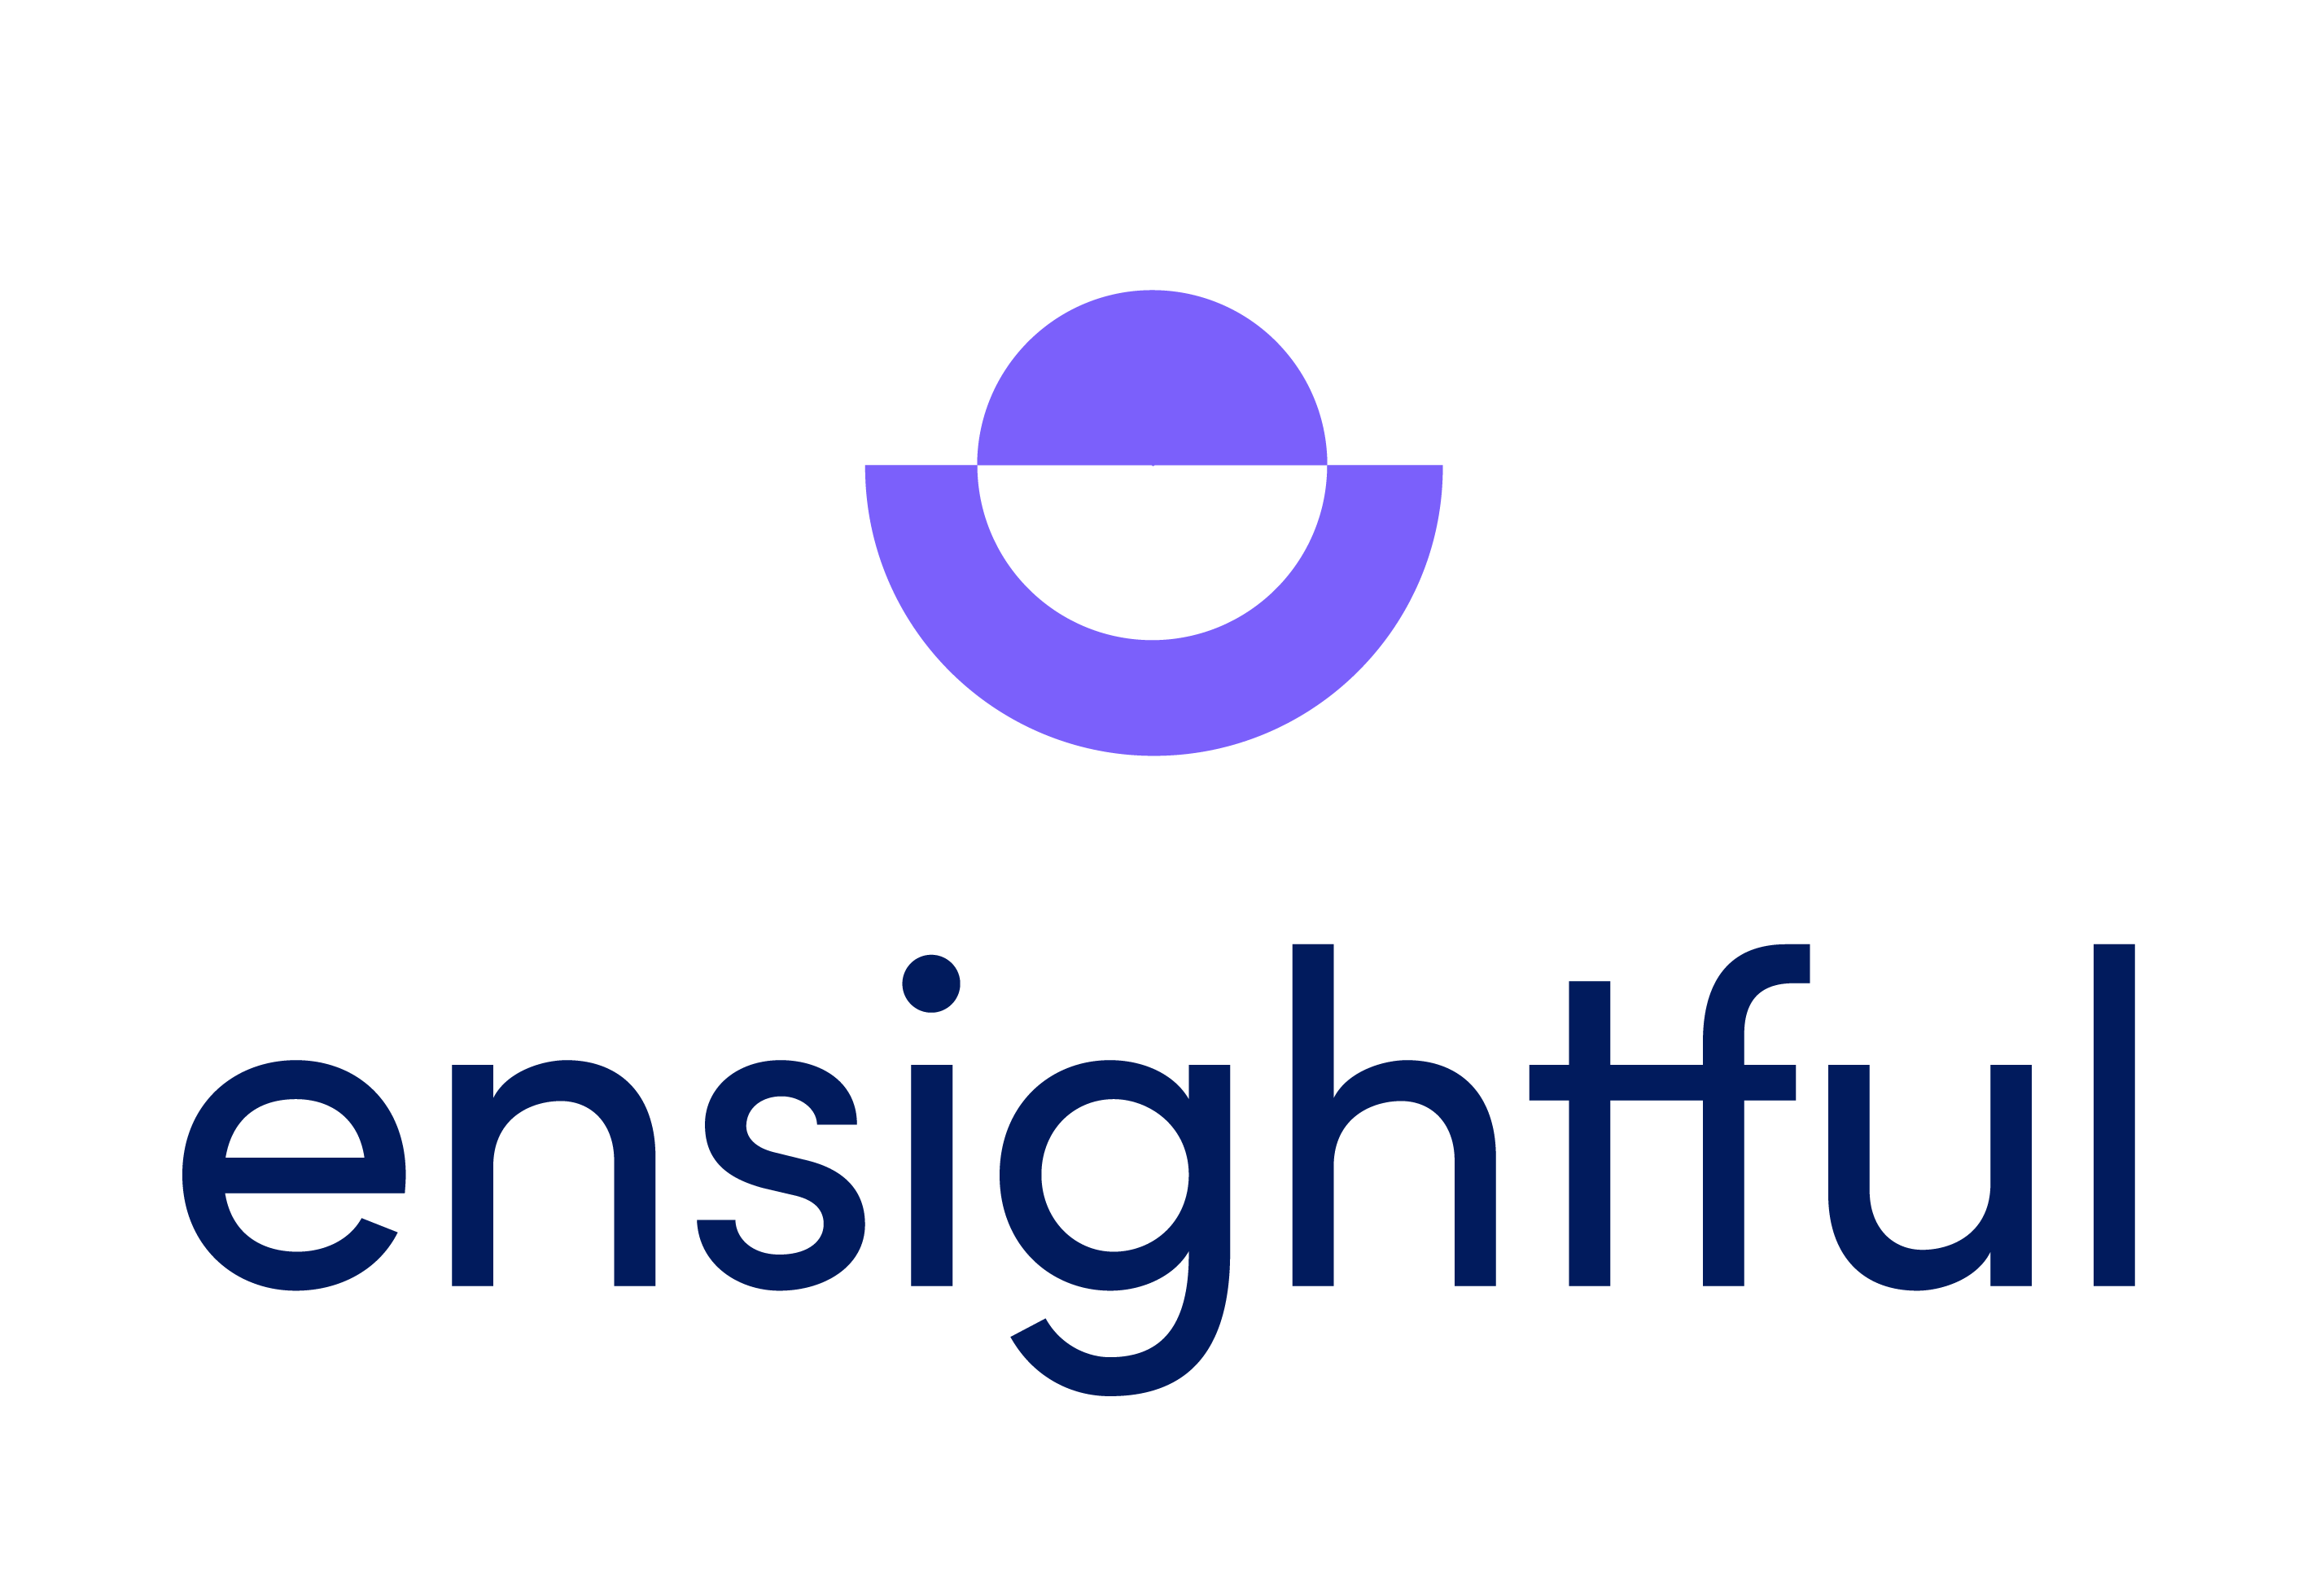 It is a purple slightly rectangular symbol that is the logo for the company Ensightful